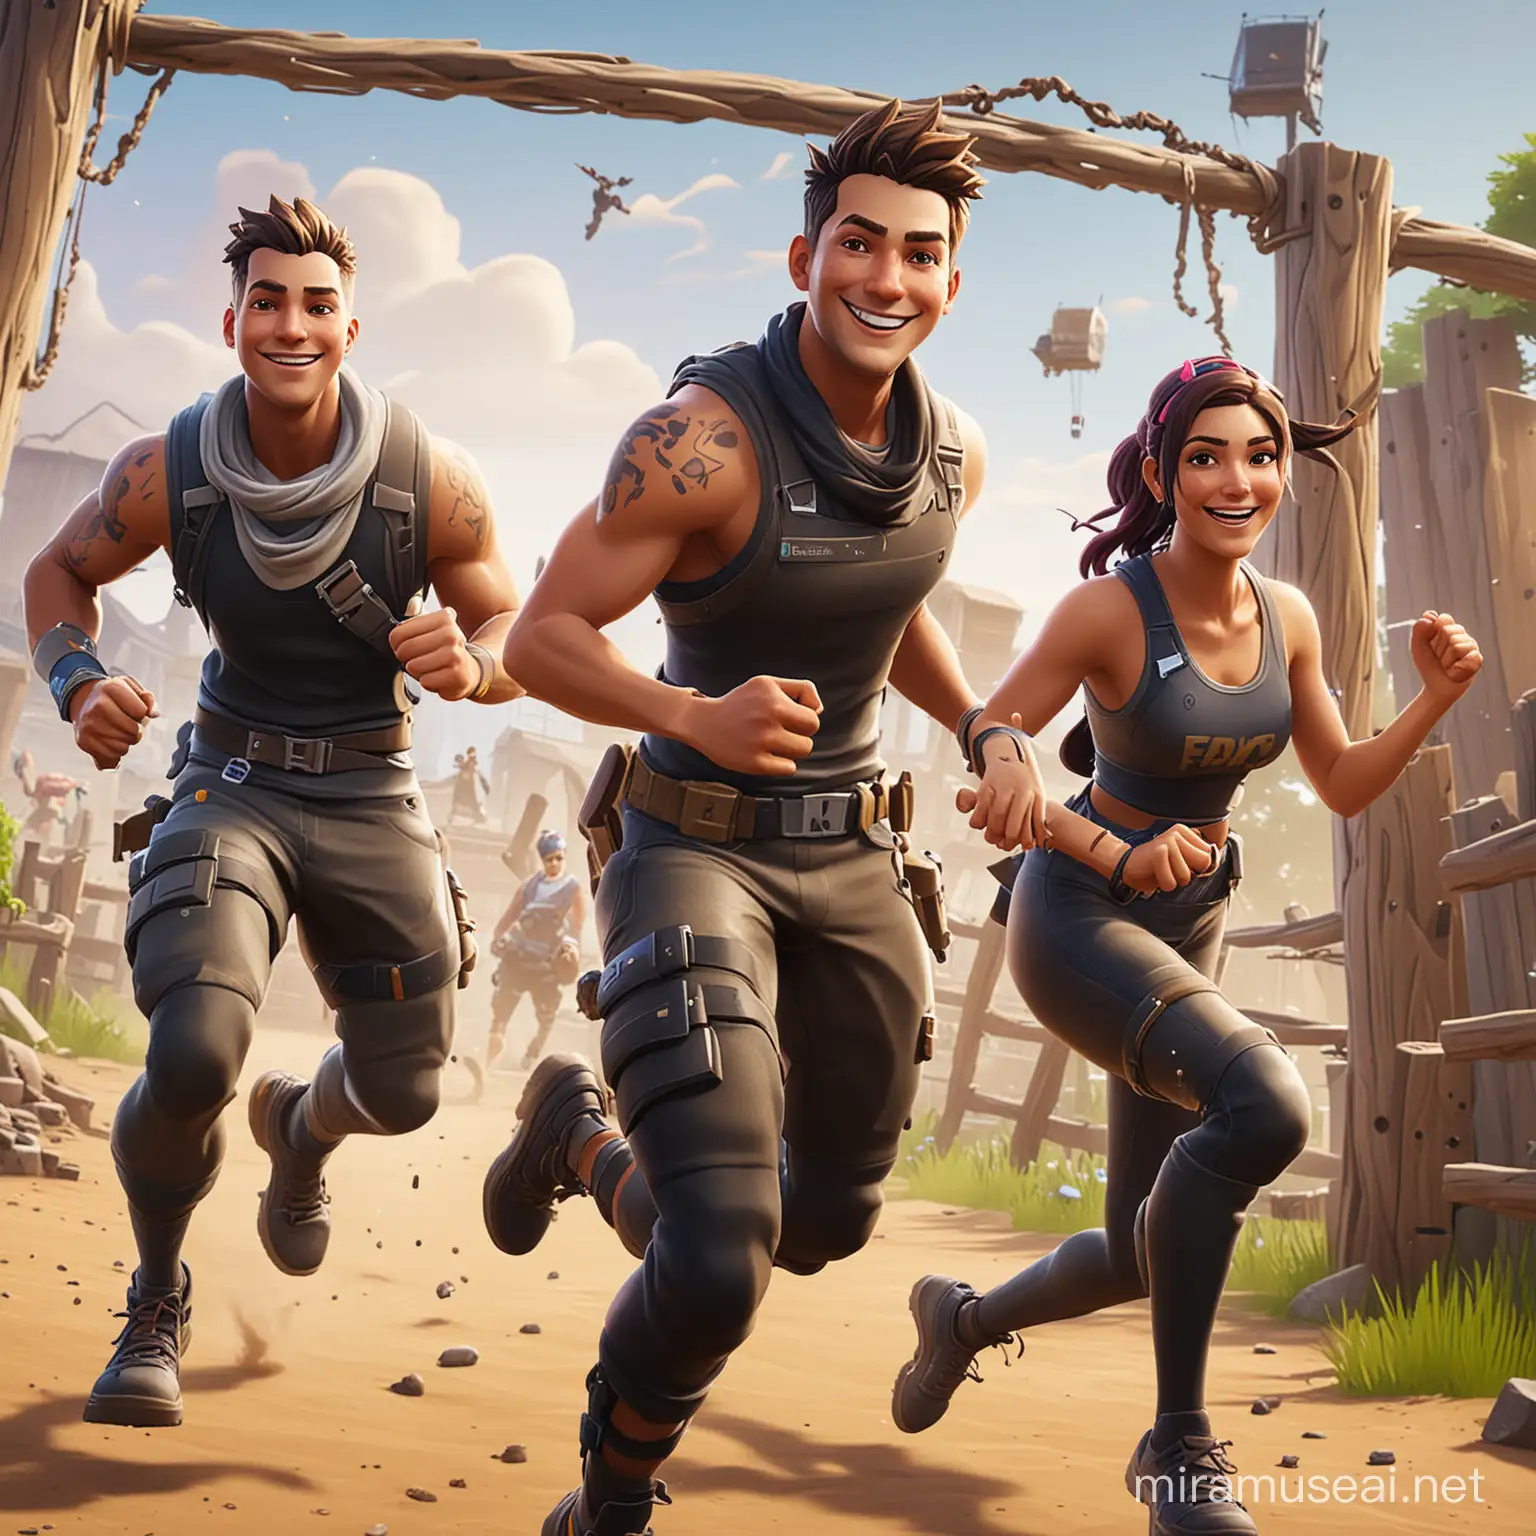 2 Fortnite characters that are smiling and are running an obstacle course,
males